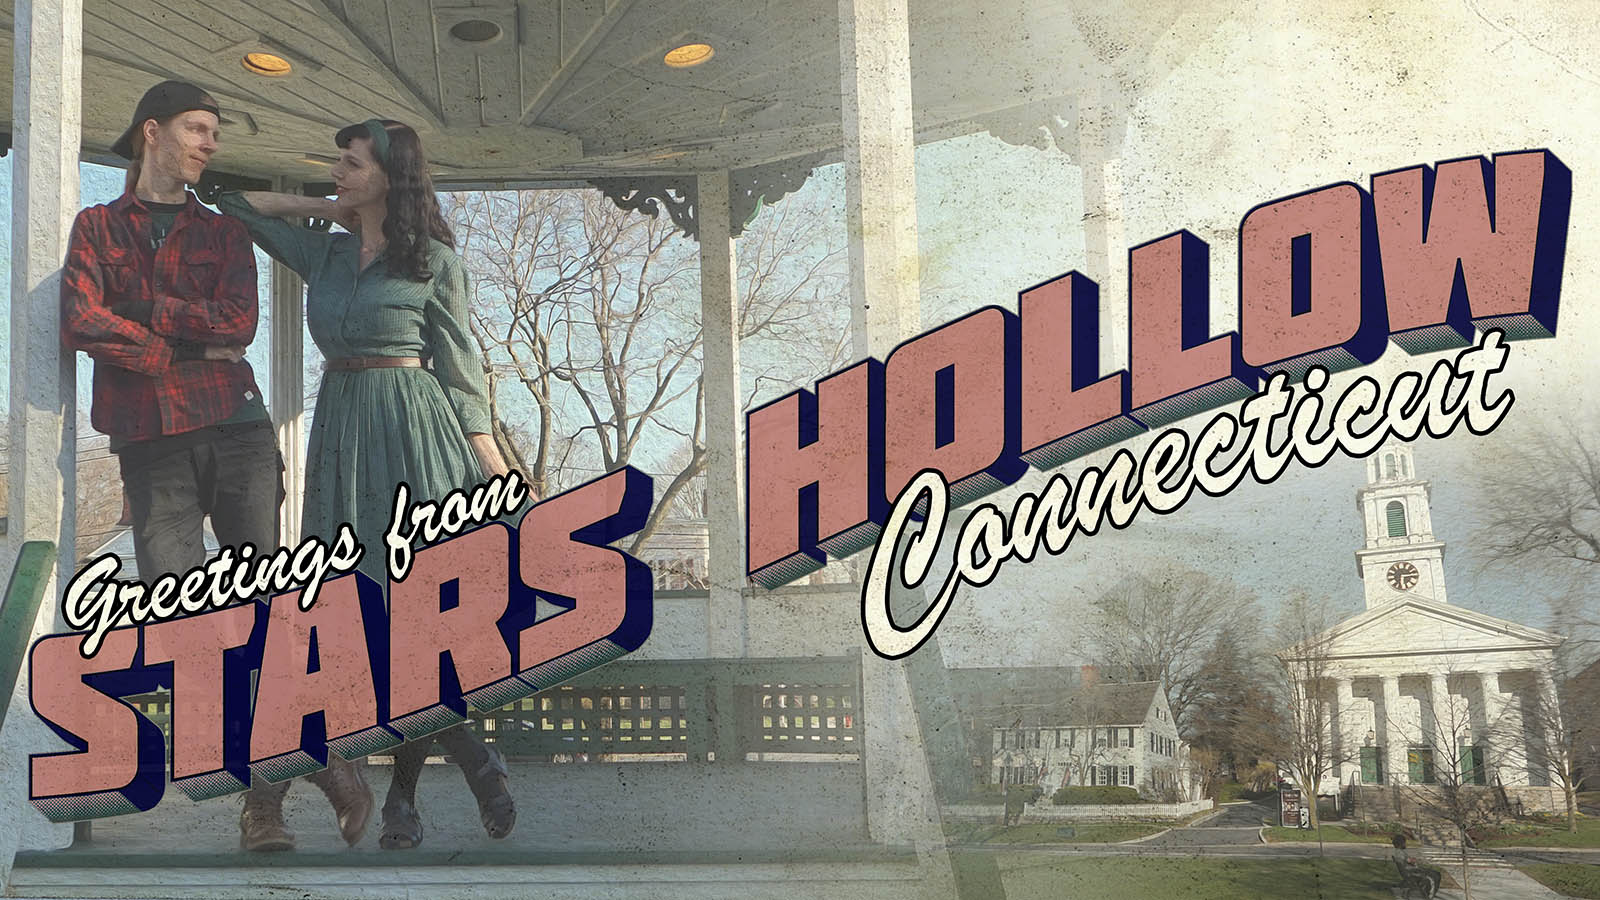 The real town of Stars Hollow - Greetings from Stars Hollow